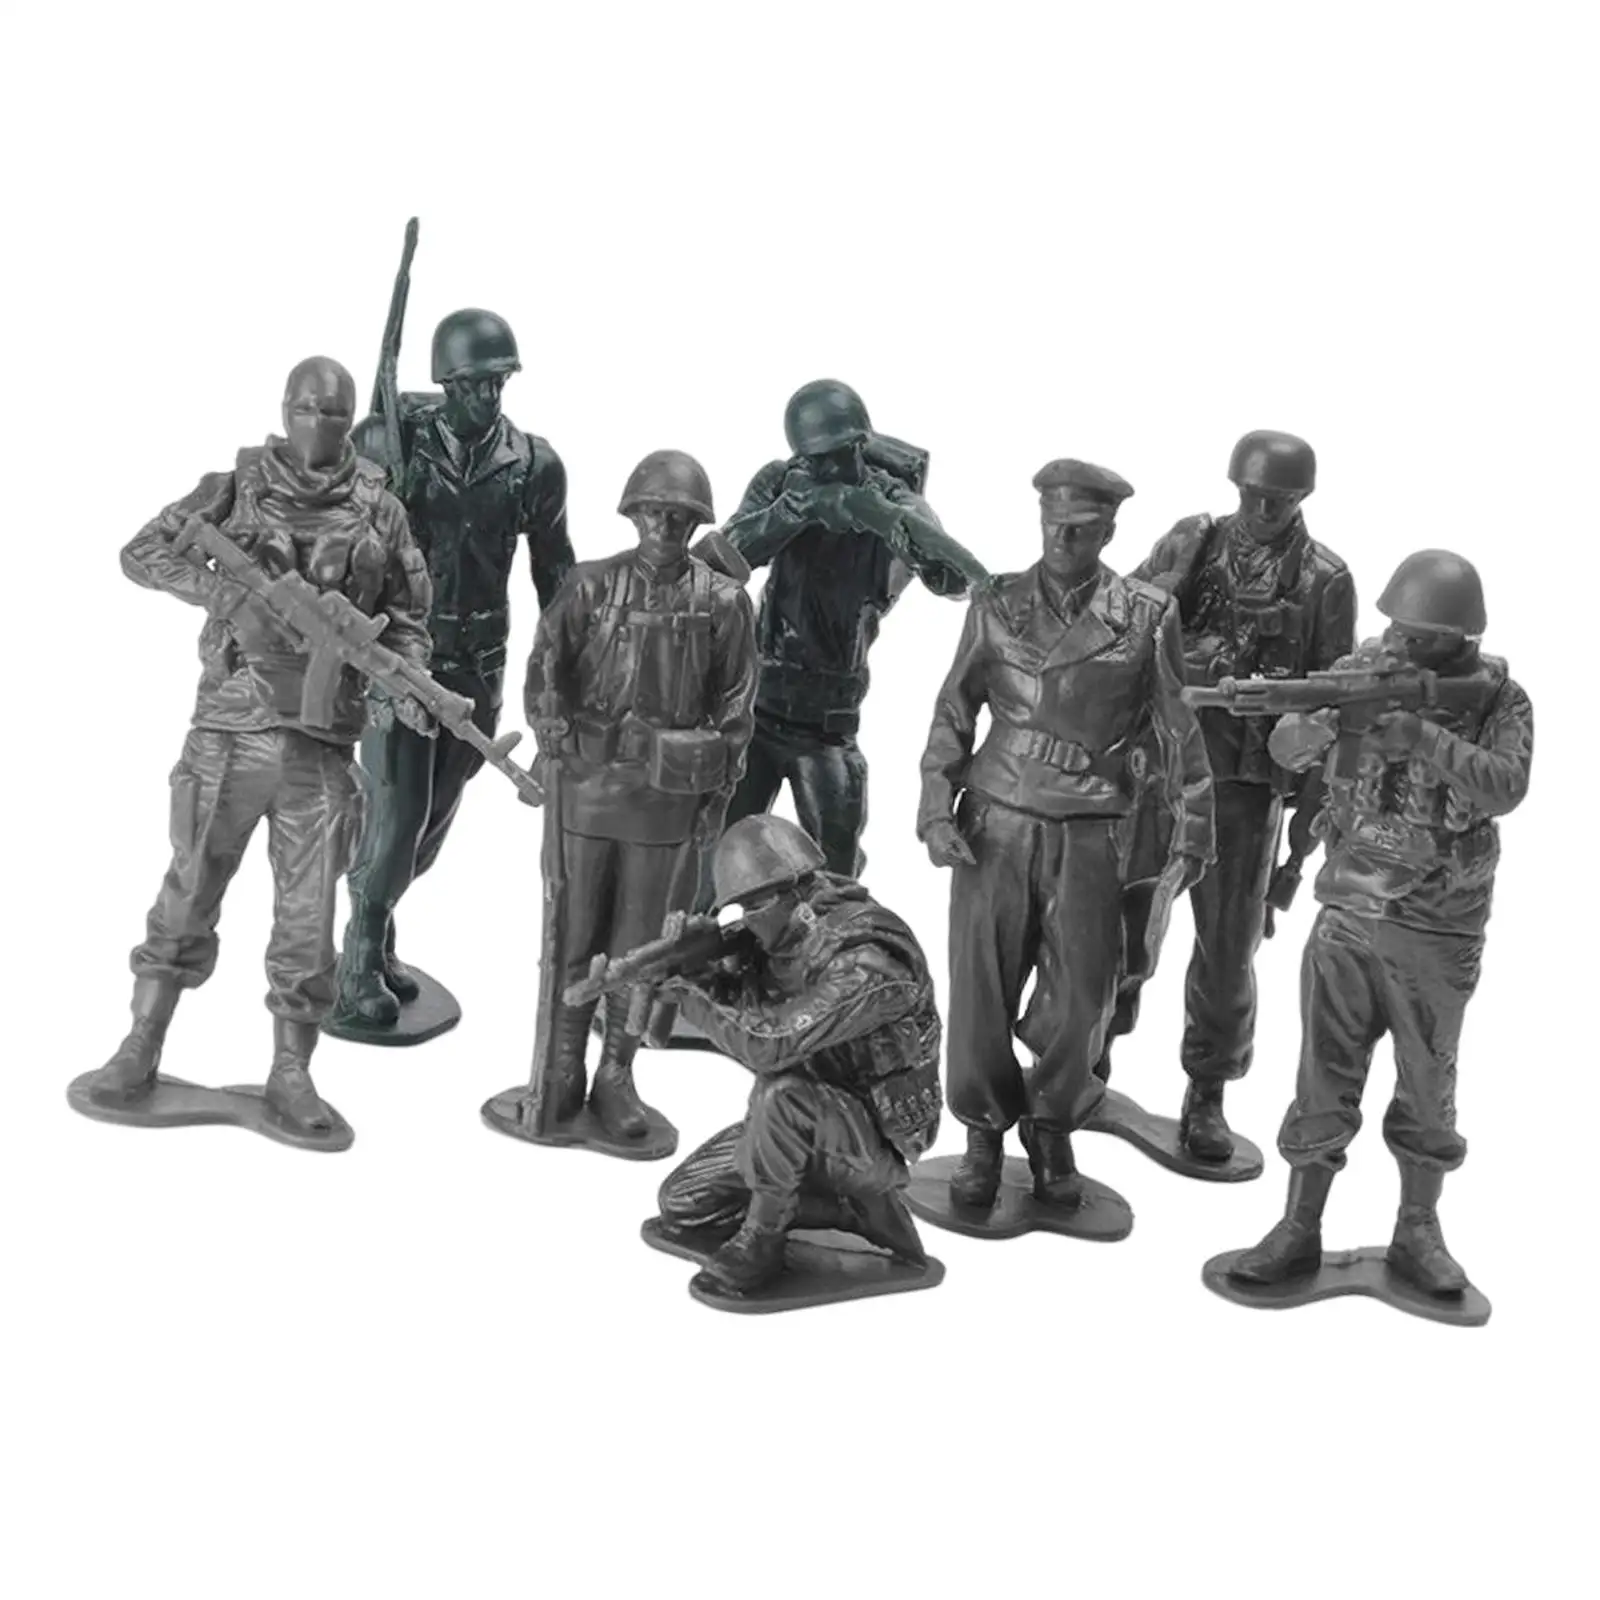 8 Pieces 1:18 Scale Action Figure Toy Soldiers Playset Soldiers Figurines Model for Kids